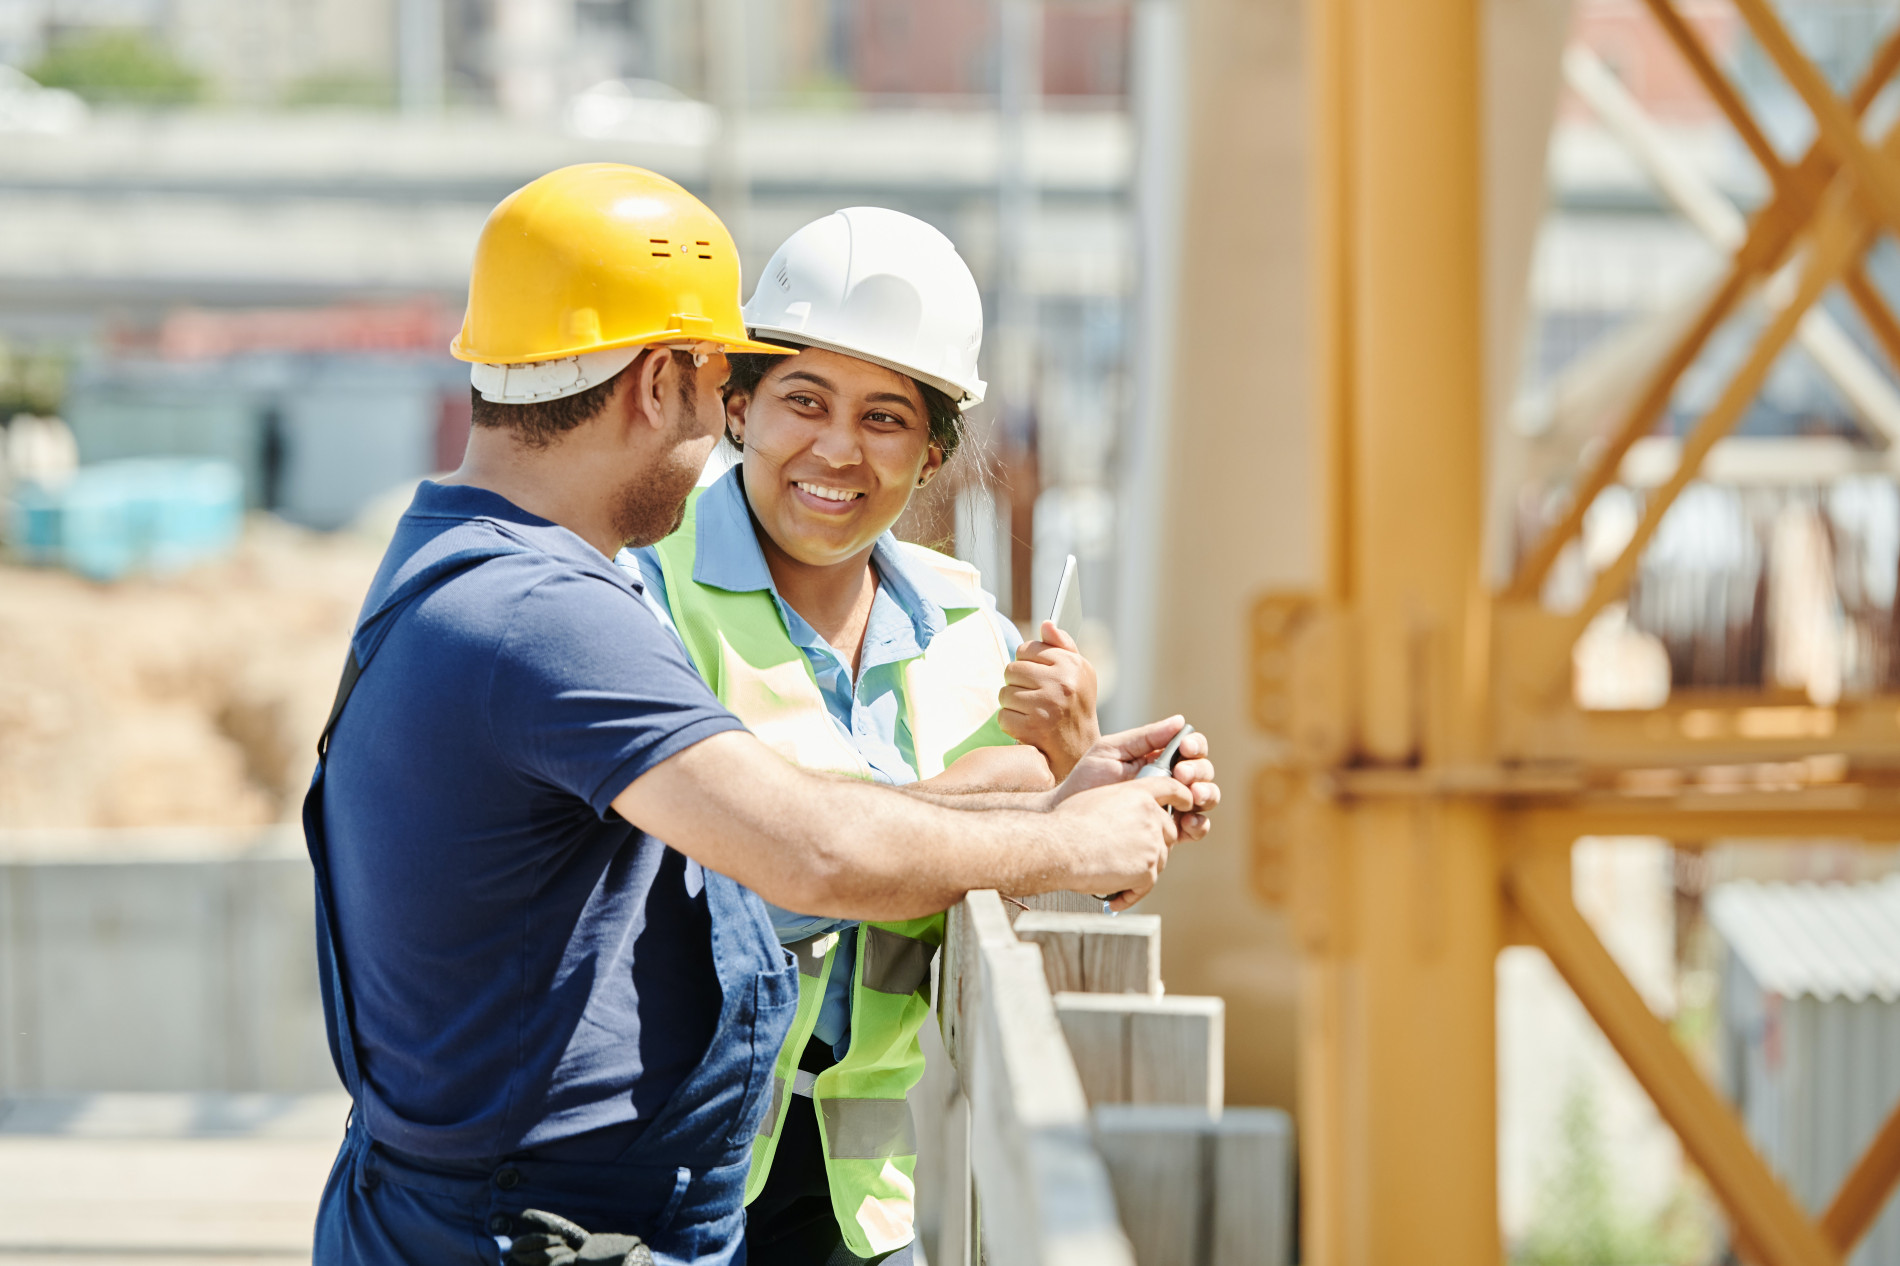 Two construction workers smile at one another on an indistinct work site.